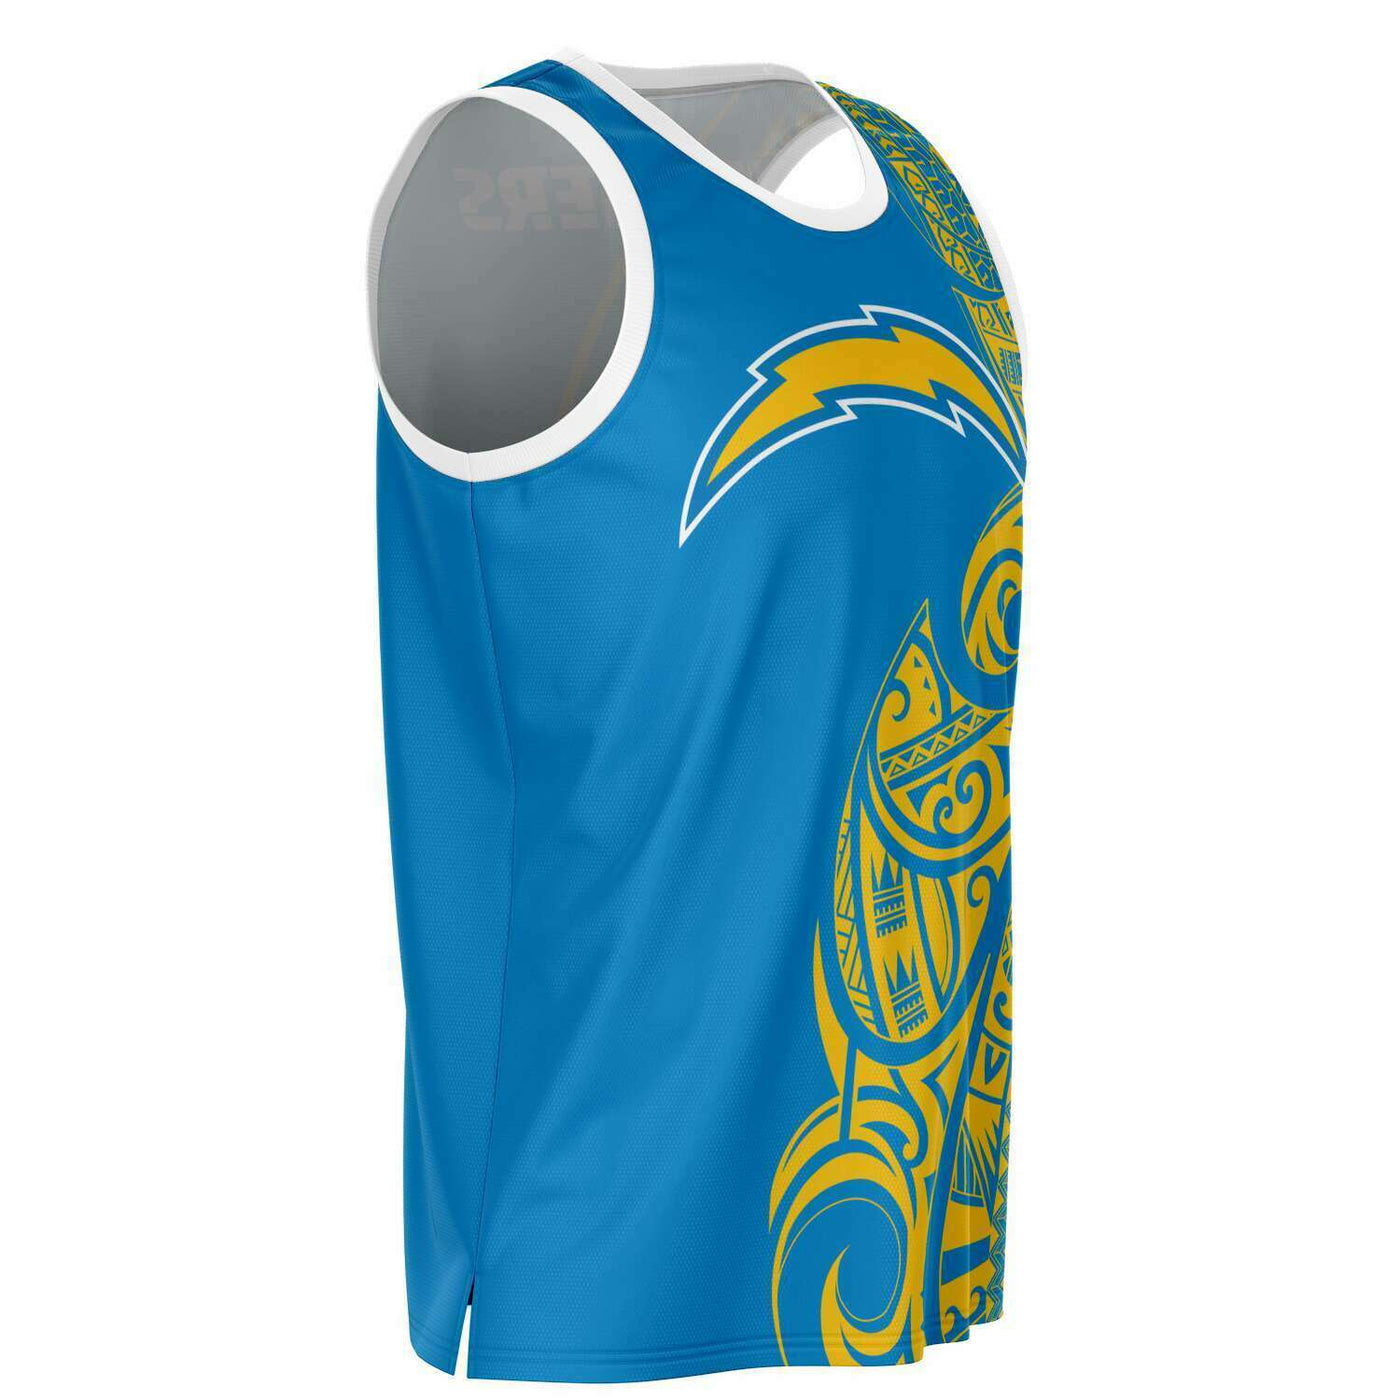 Subliminator Los Angeles Chargers Basketball Jersey White